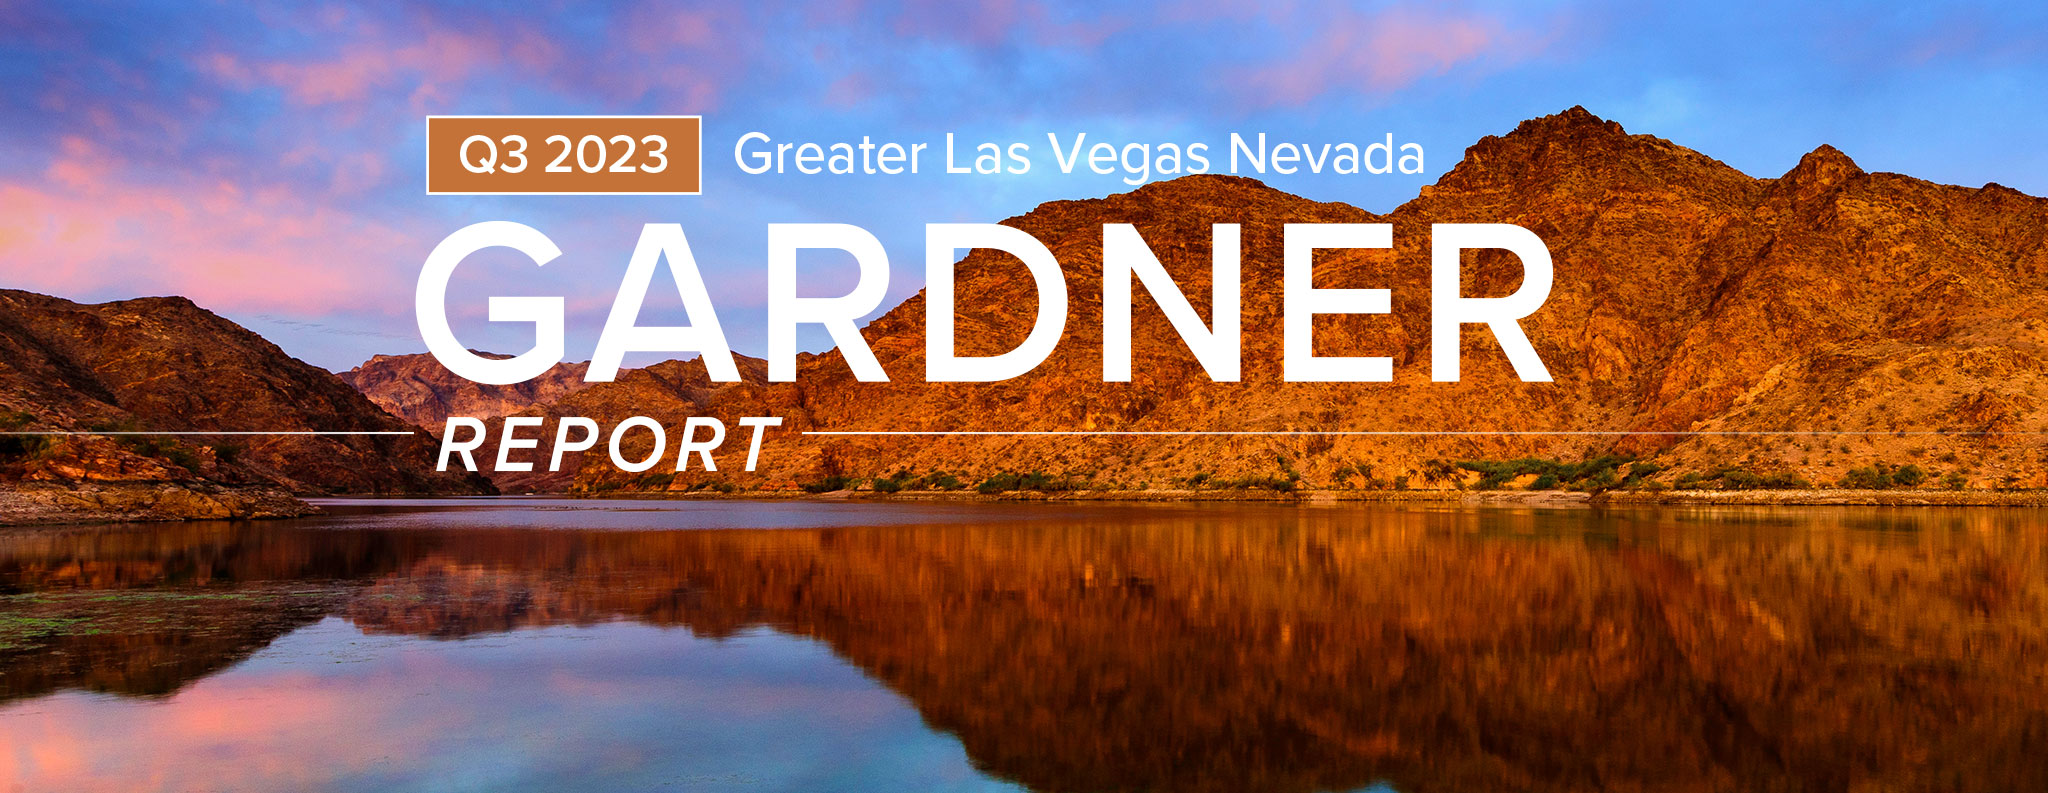 A photo of a lake surrounded by desert mountains with the words “Q3 2023 Greater Las Vegas Nevada Gardner Report” written over it.